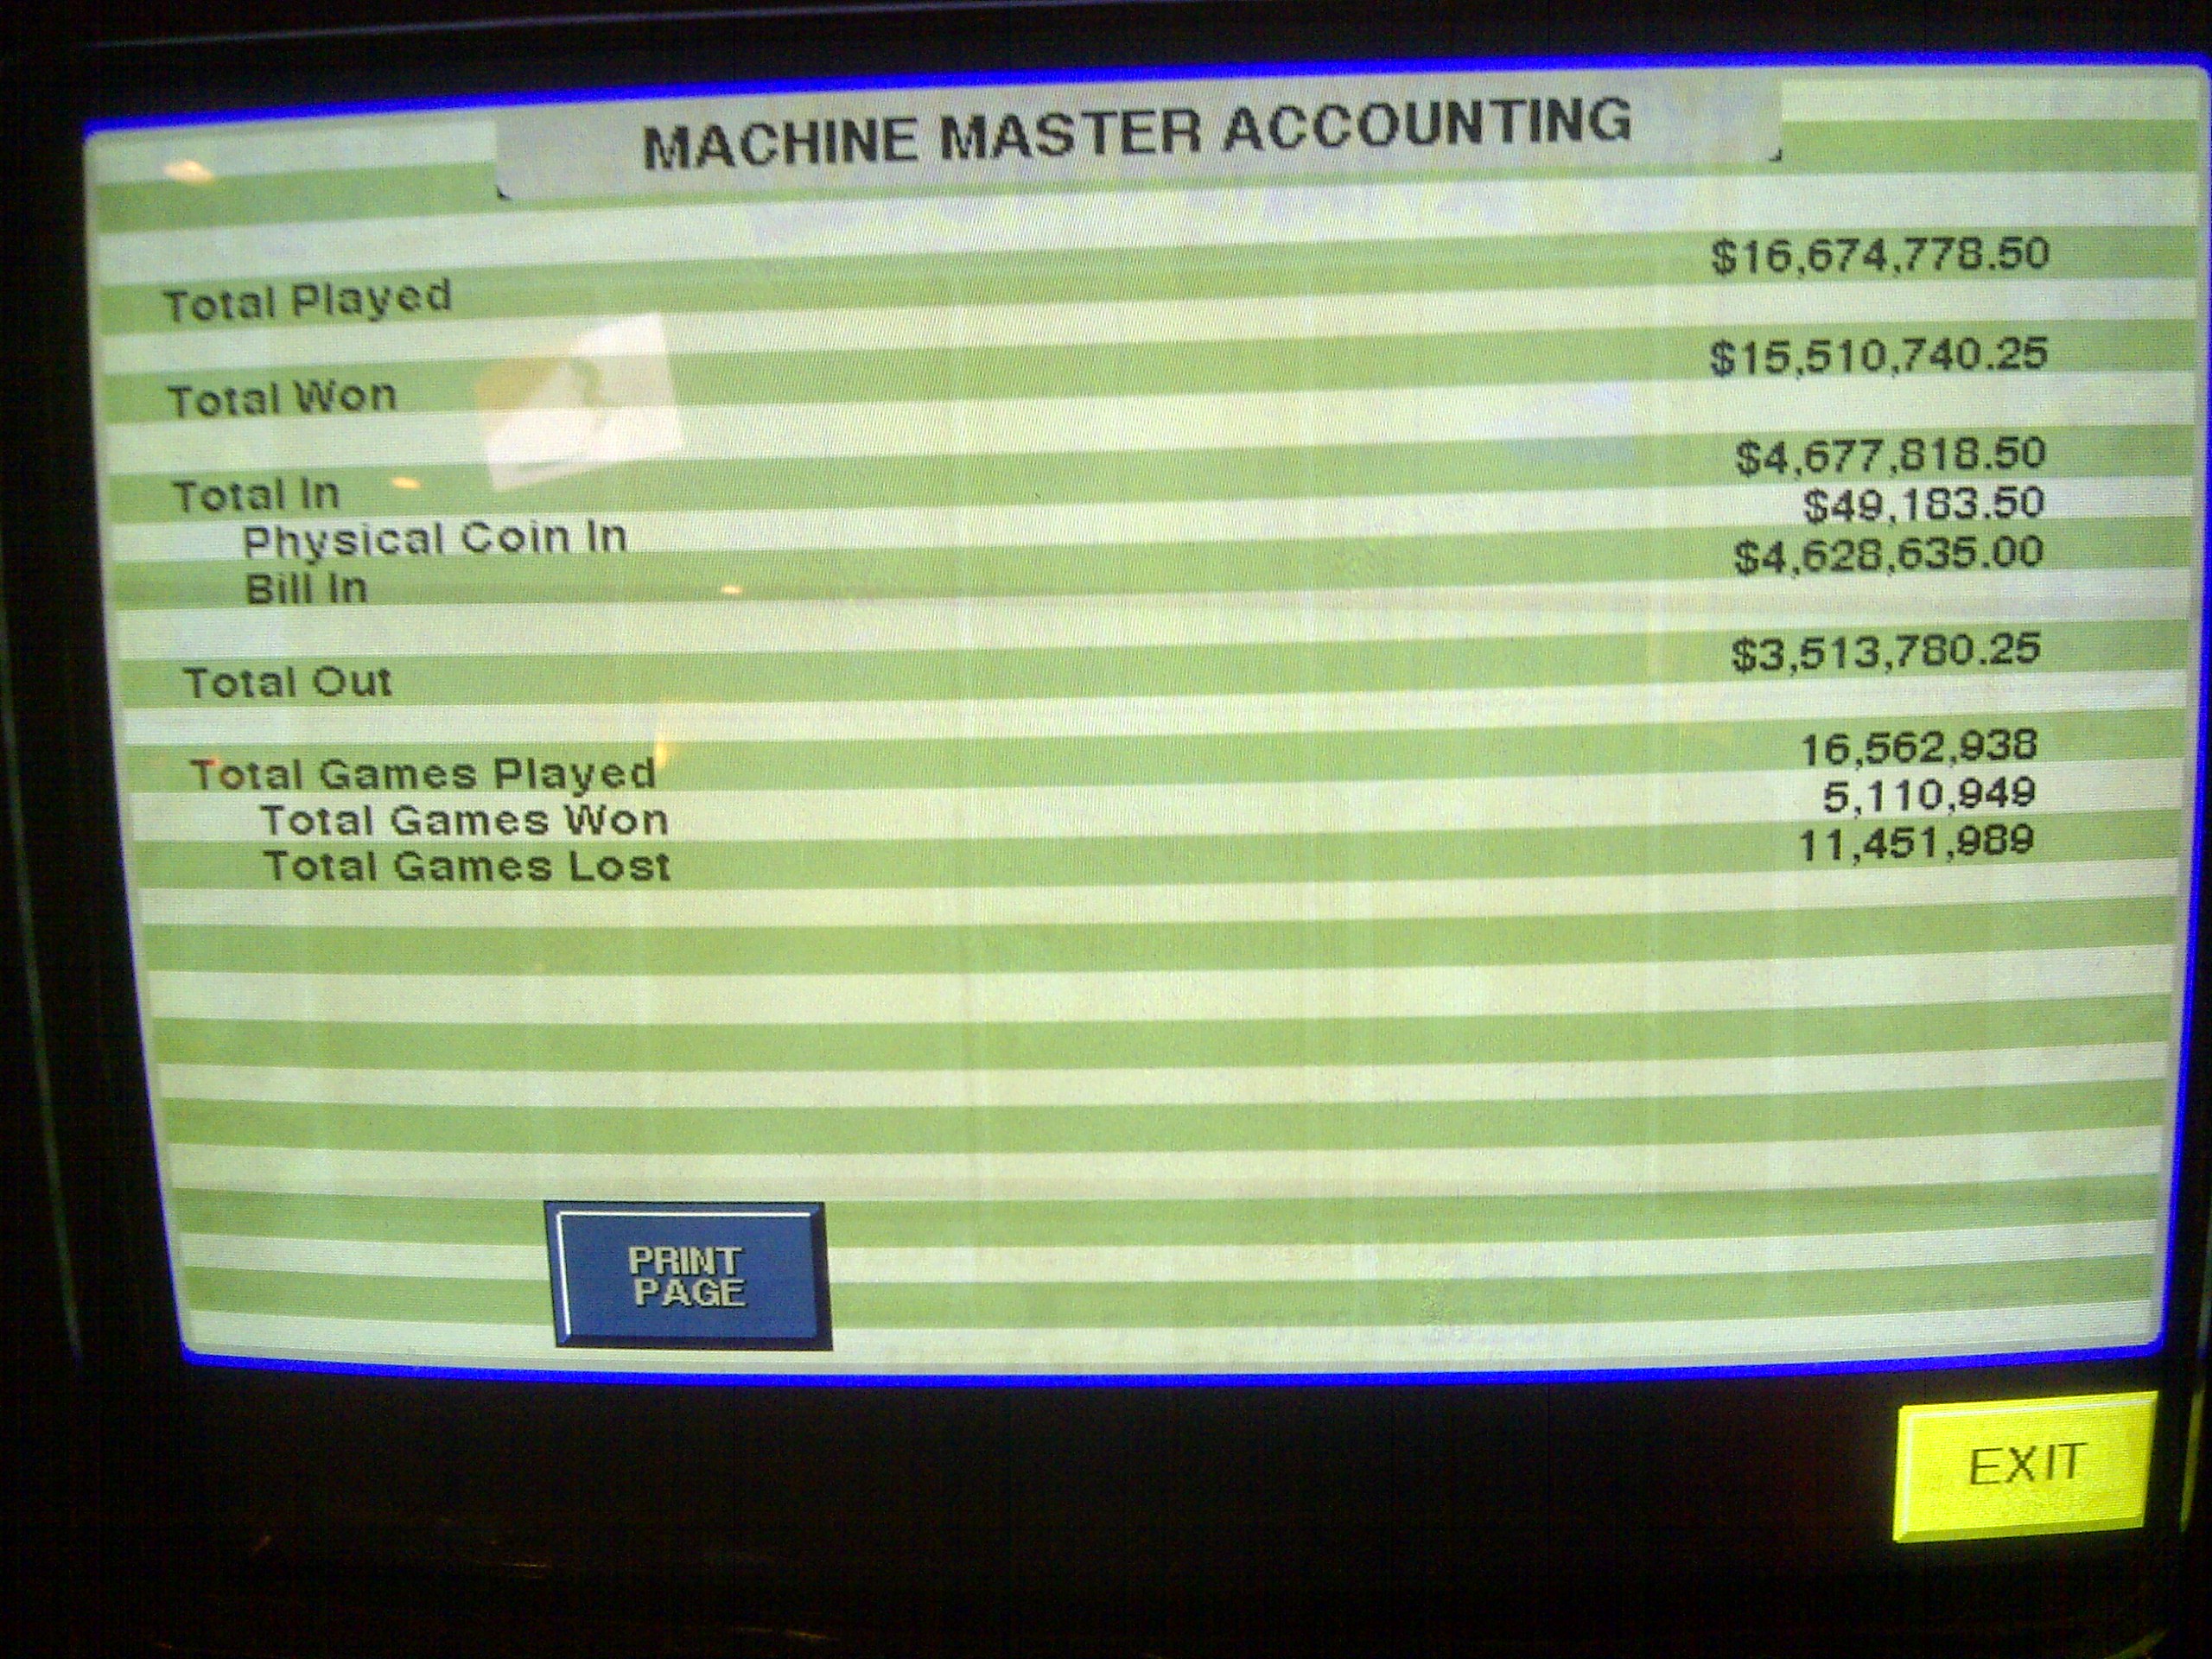 A capture of a screen left on a VLT in Manitoba showing the payout for that machine,